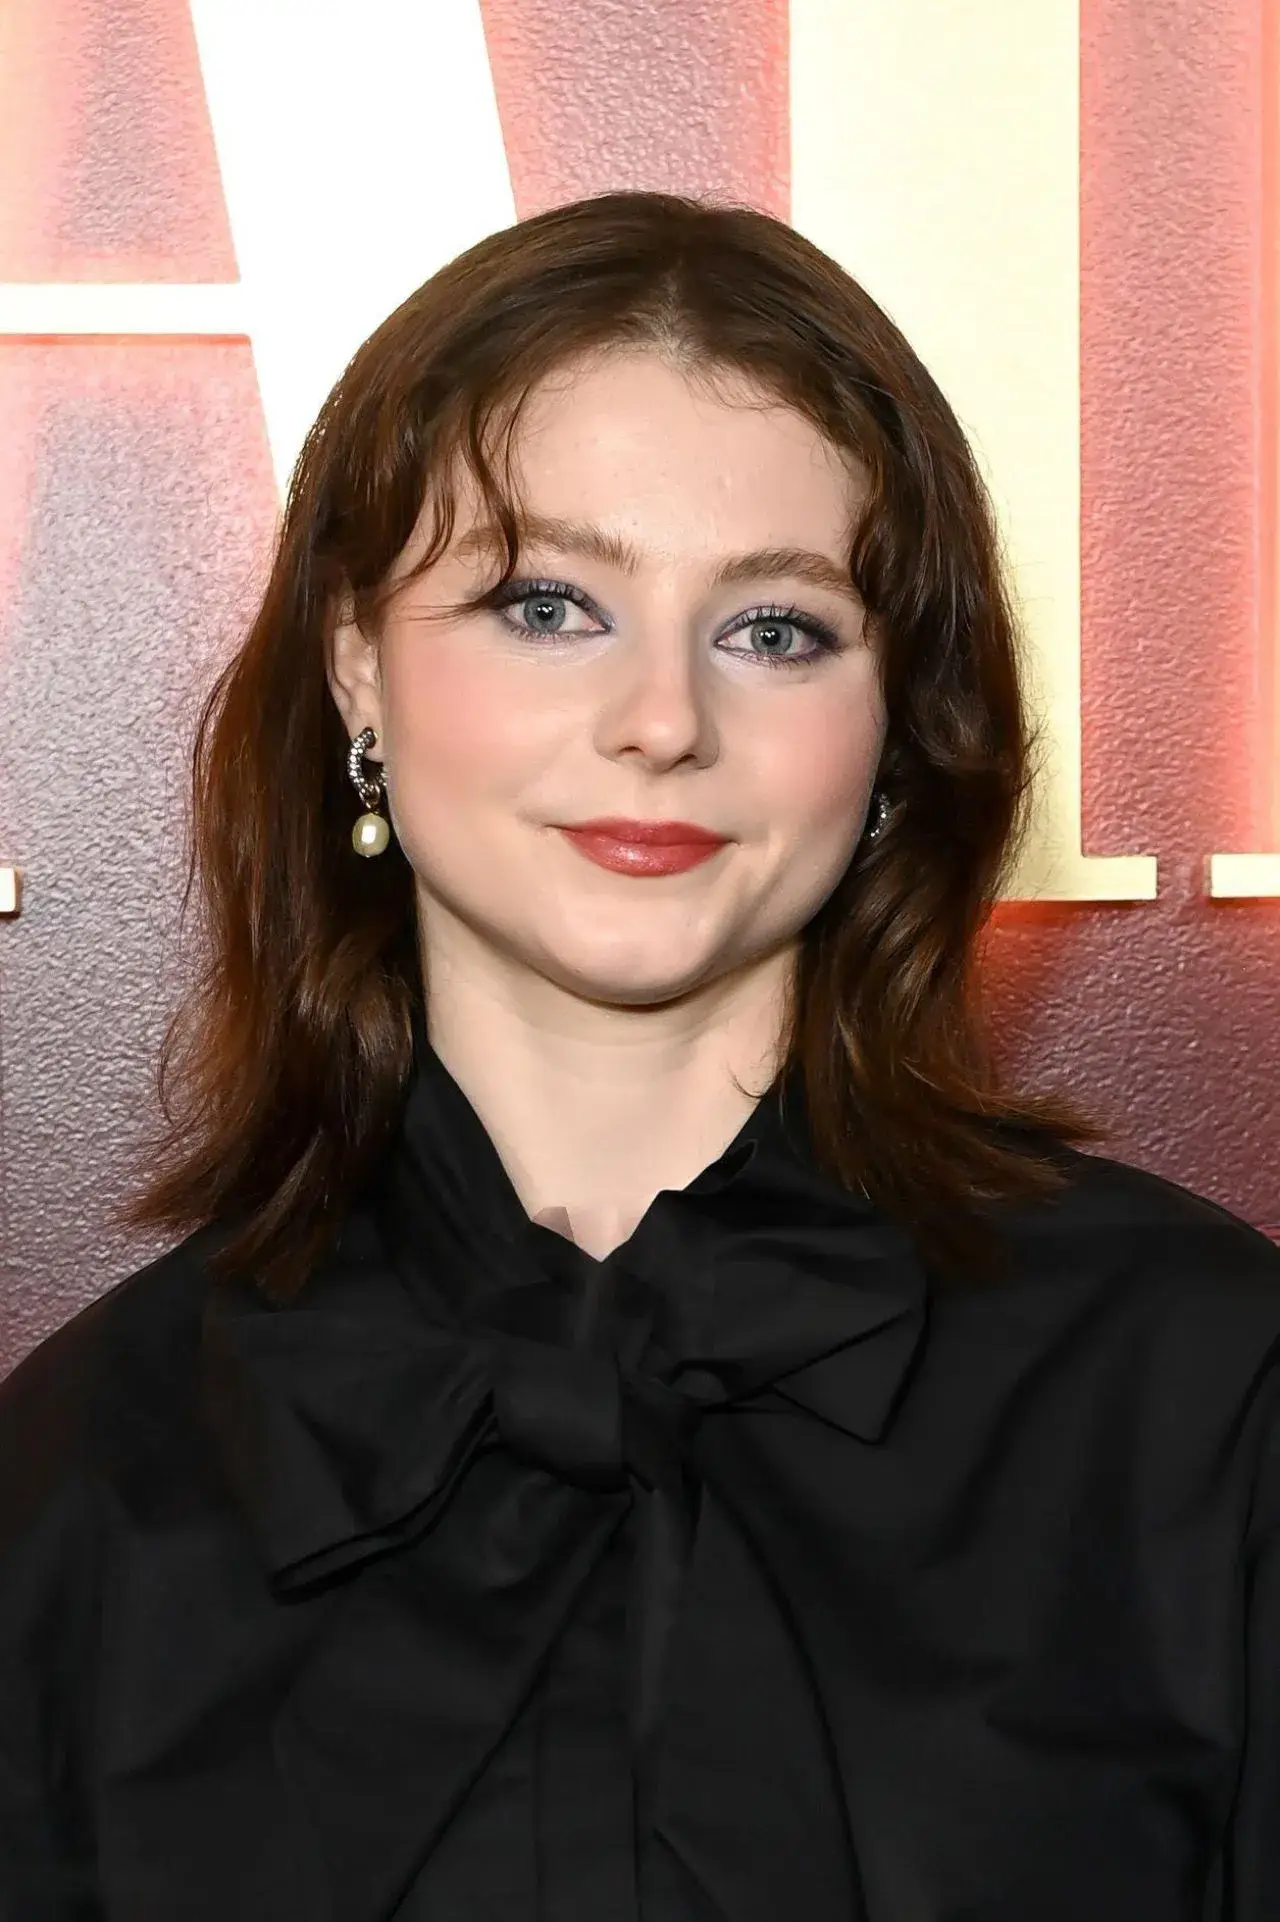 THOMASIN MCKENZIE AT VANITY FAIR AND INSTAGRAM VANITIES A NIGHT FOR YOUNG HOLLYWOOD 4